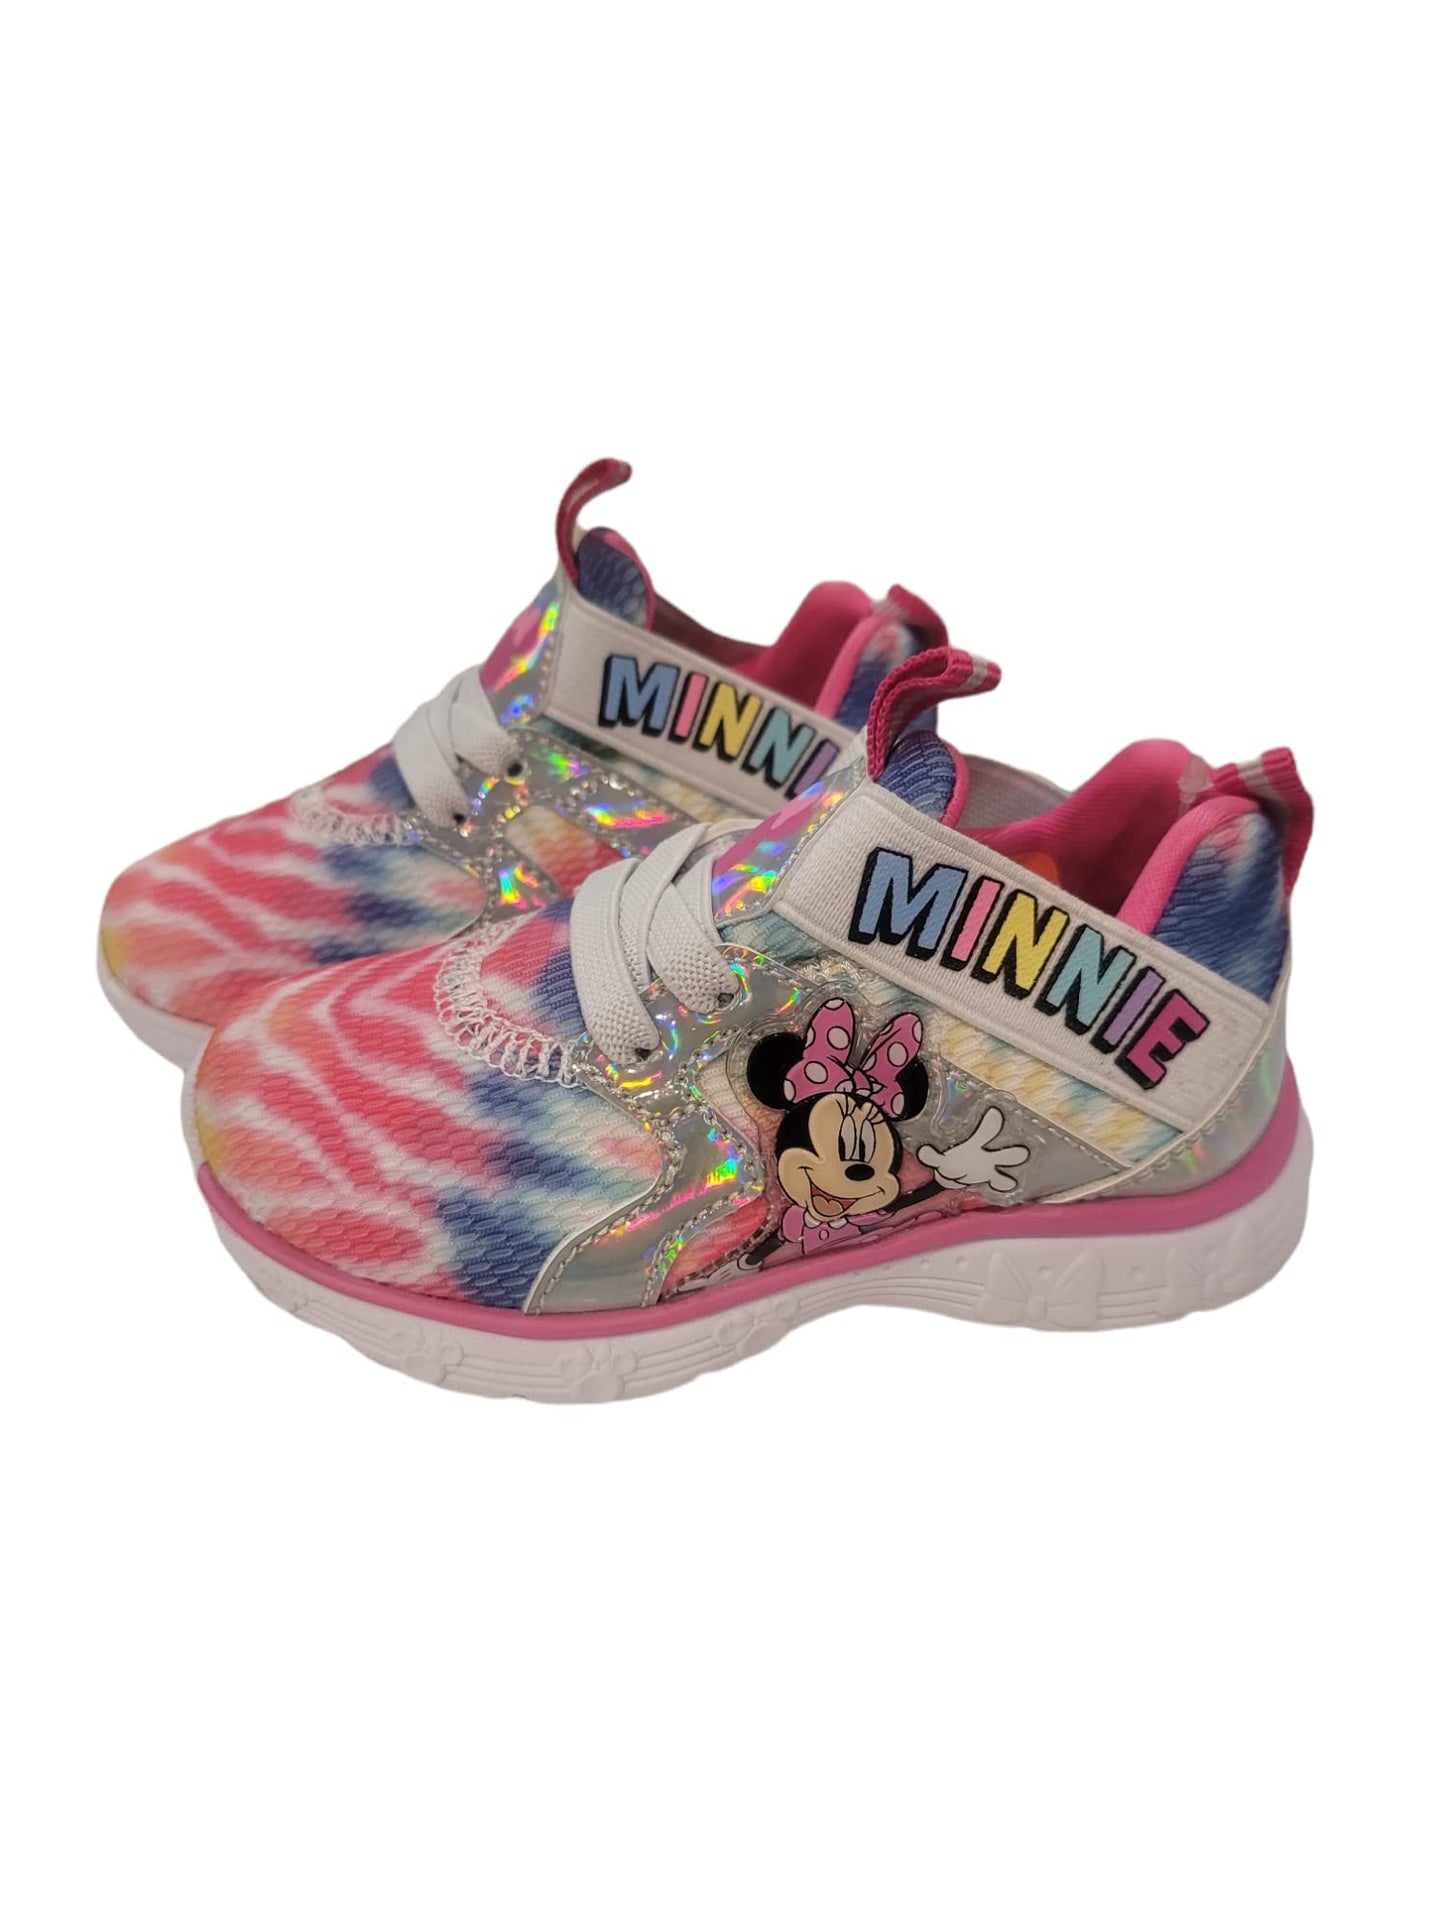 Disney Minnie Mouse Girl's Lighted Athletic Sneaker (Toddler/Little Kid)